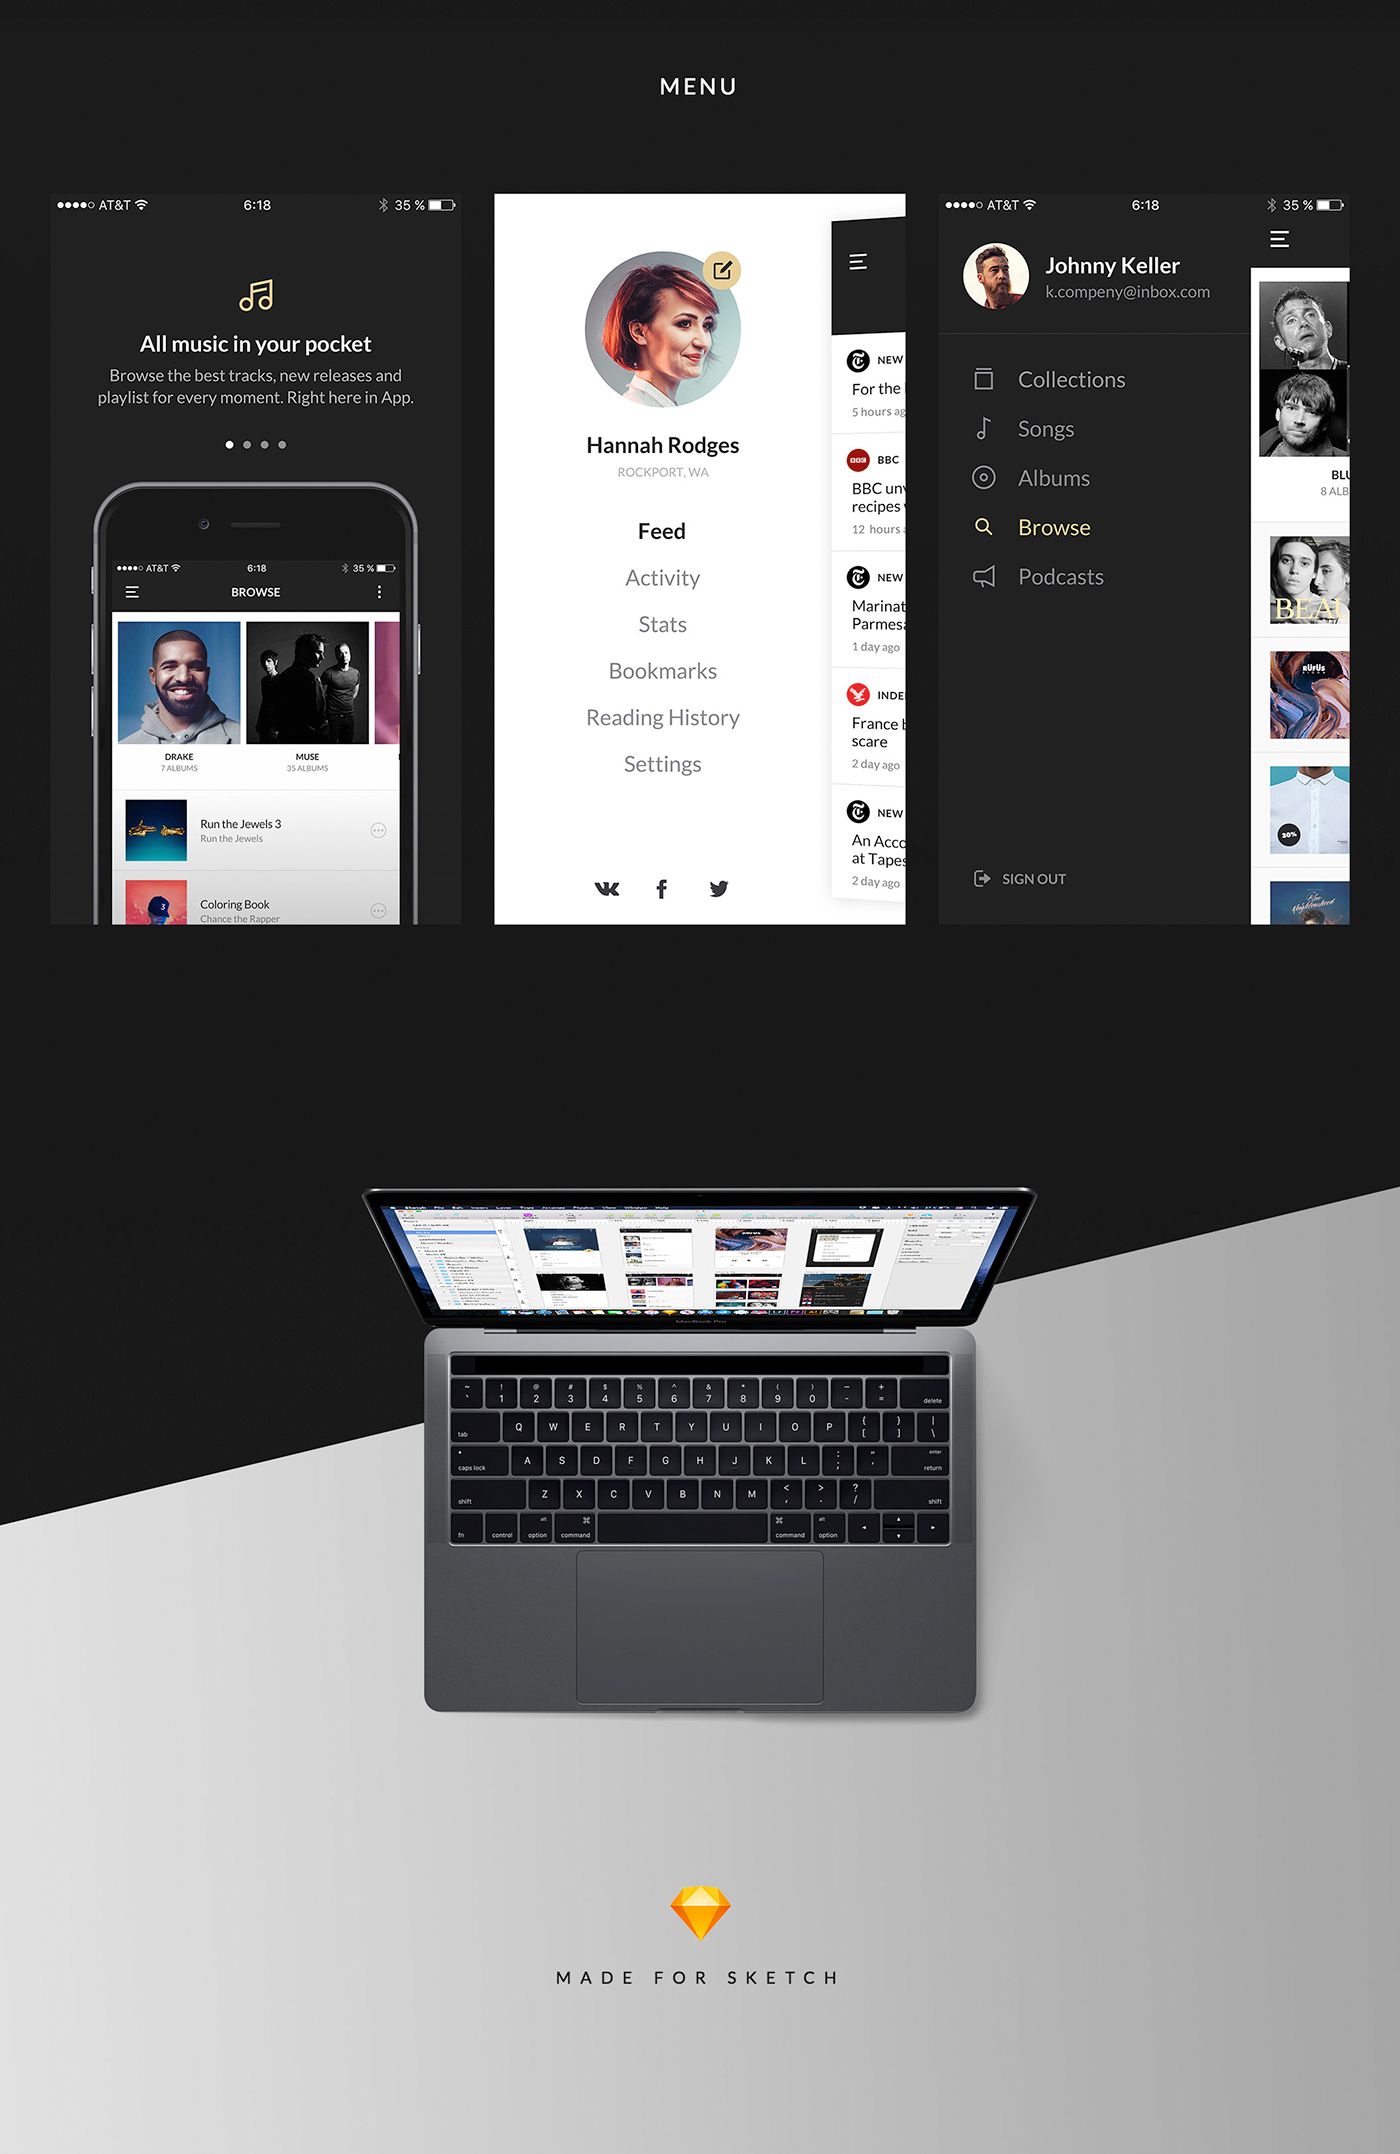 ui kit user interface vector Mobile app ios ios human interface guidelines social networks Ecommerce